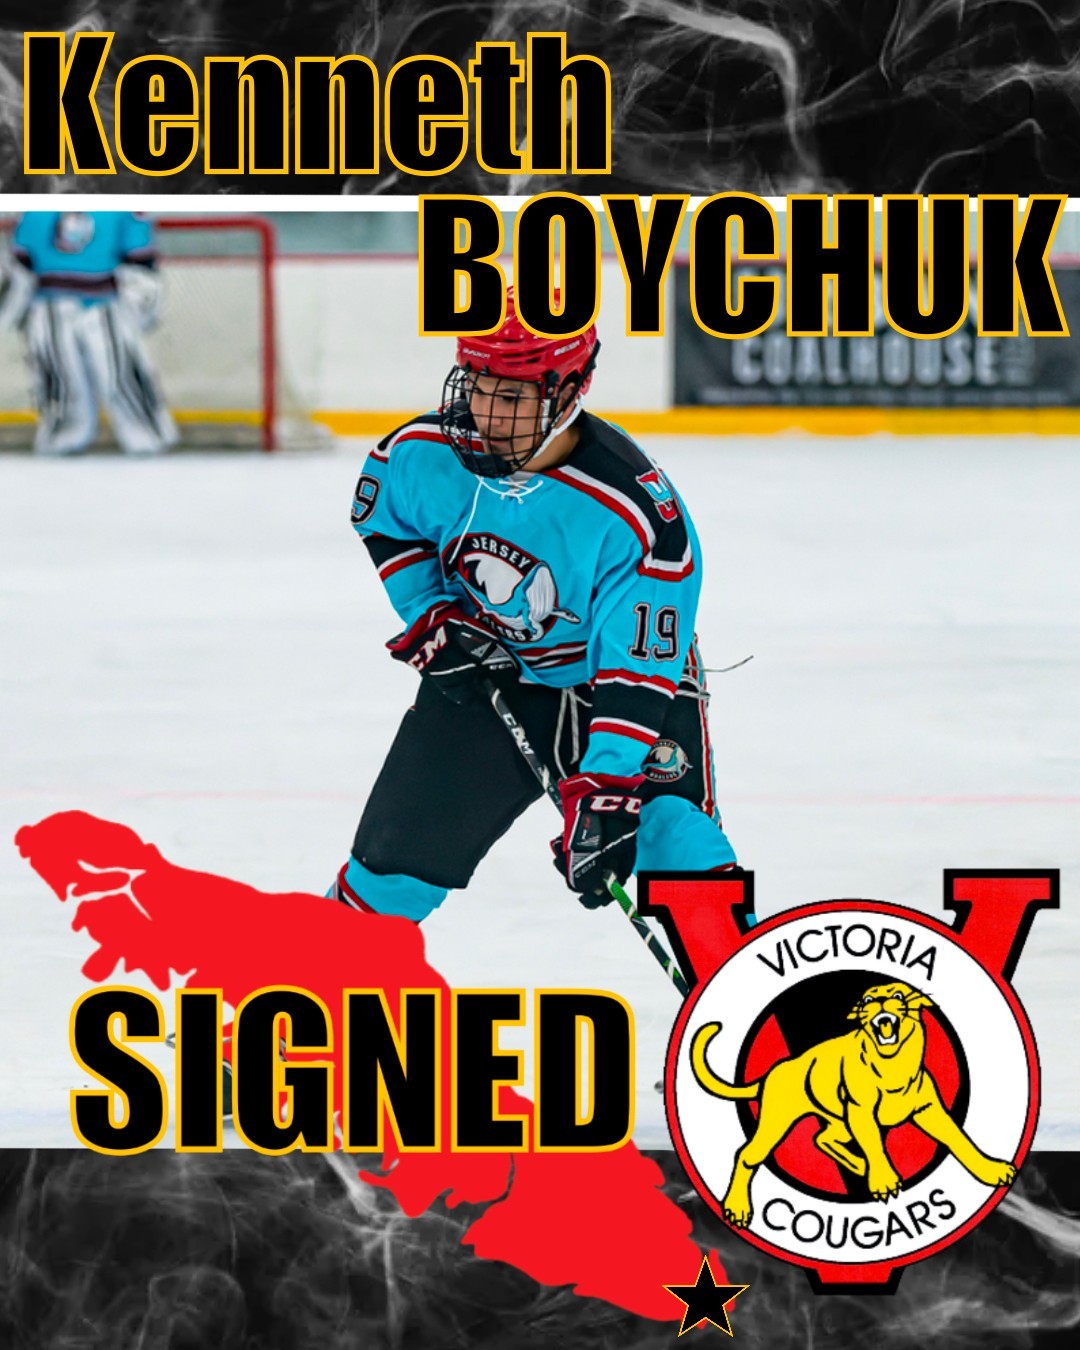 SIGNED! The Cougars have signed Edmonton product Kenneth “Kenny” Boychuk for the upcoming season. The 2004 born forward played for the Jersey Whalers out of the USPHL Elite last season.